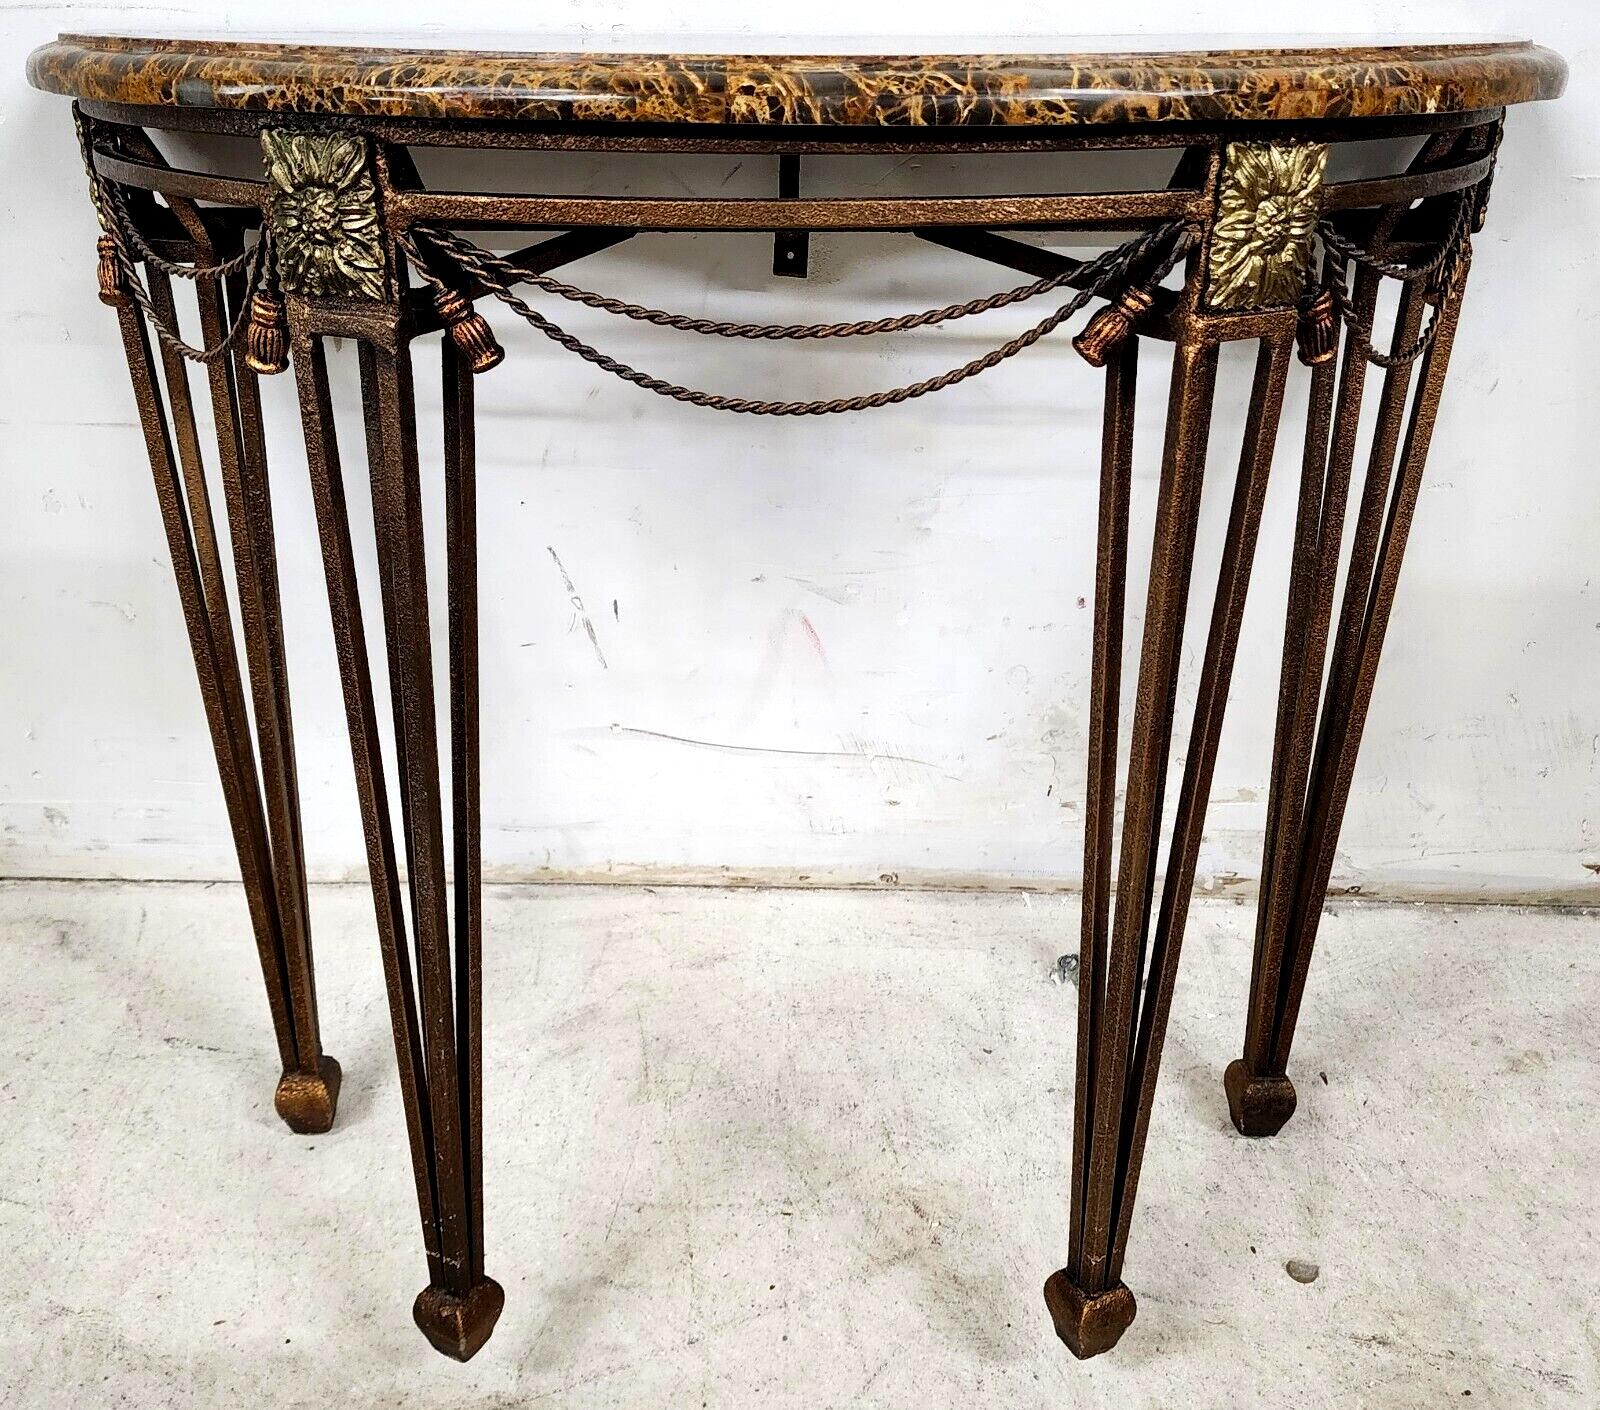 For FULL item description click on CONTINUE READING at the bottom of this page.

Offering One Of Our Recent Palm Beach Estate Fine Furniture Acquisitions Of An 
Iron Rope & Tassel Tessellated Marble Demilune Console Table After Oscar Bach with